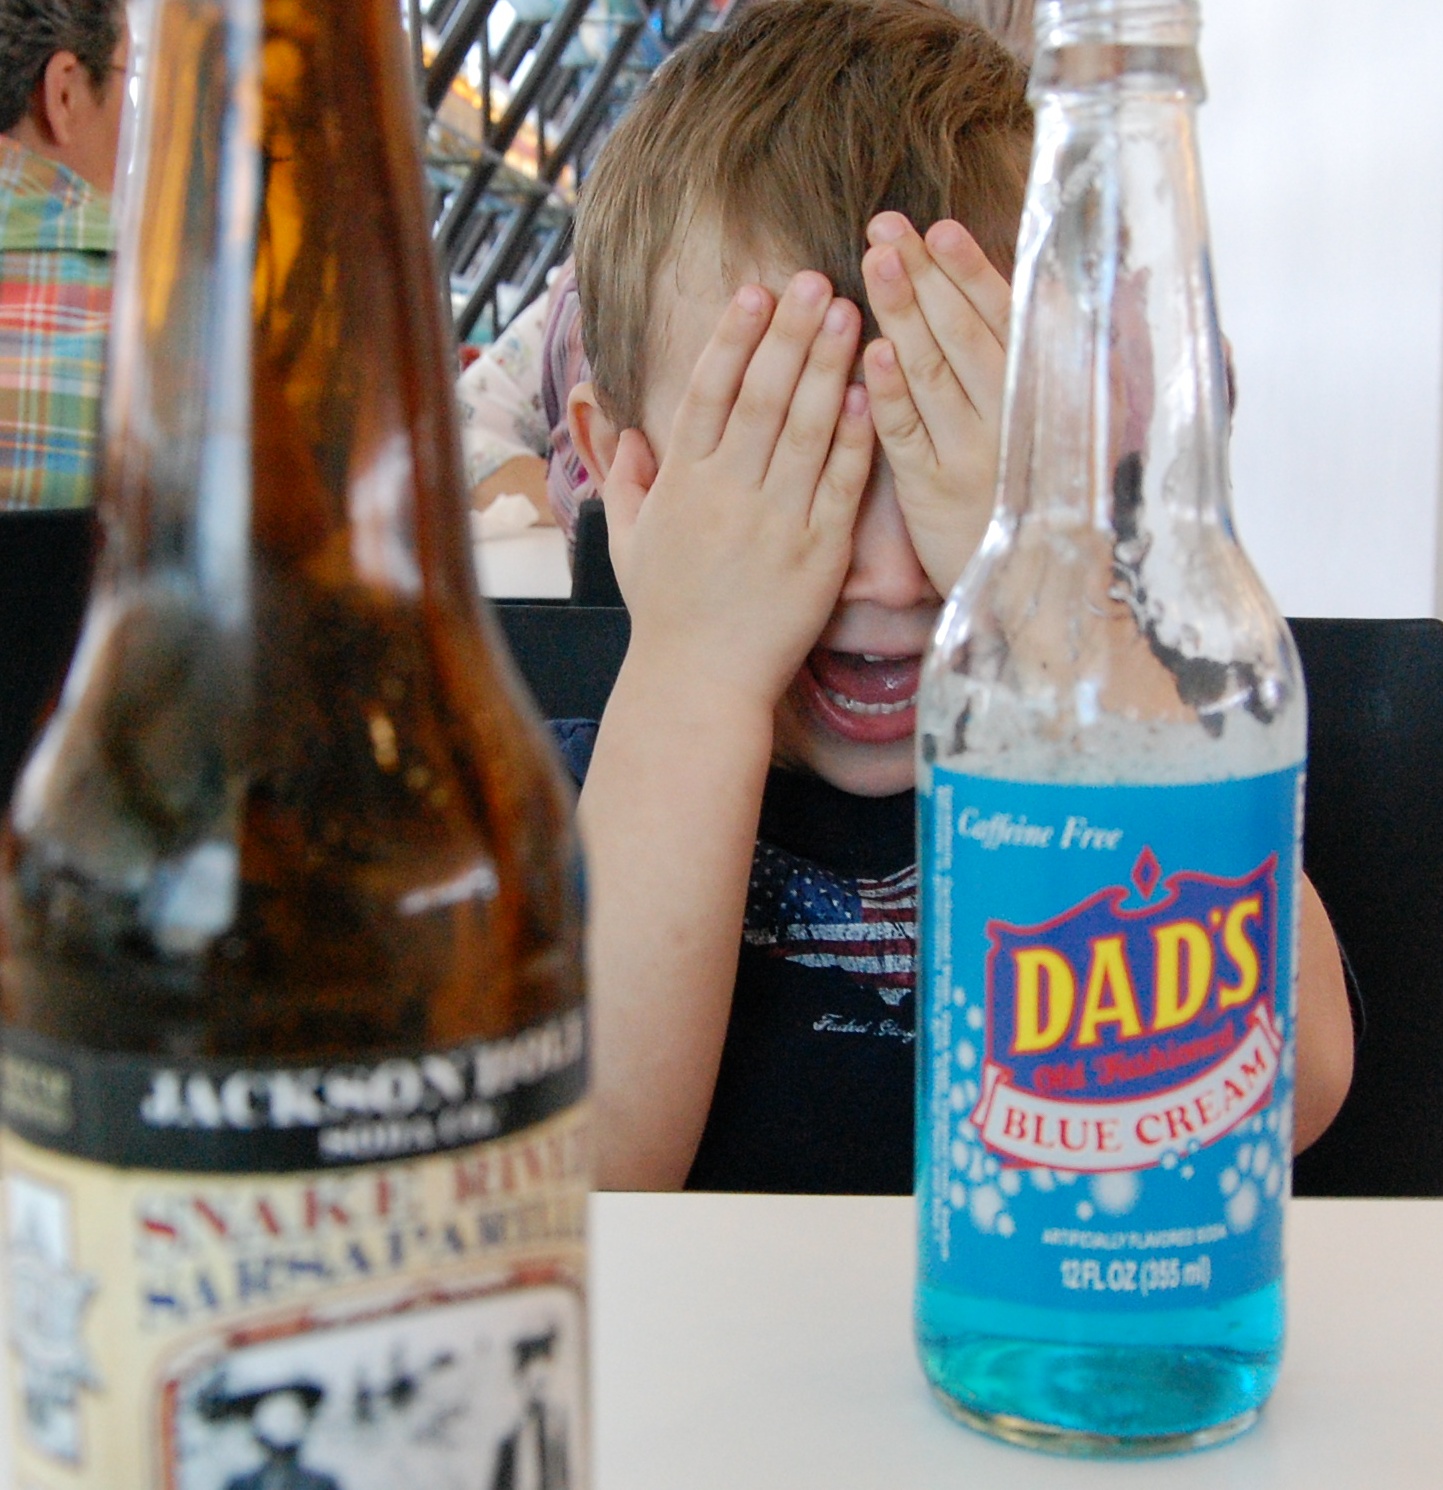 Dads Cream Soda at Pops on Route 66